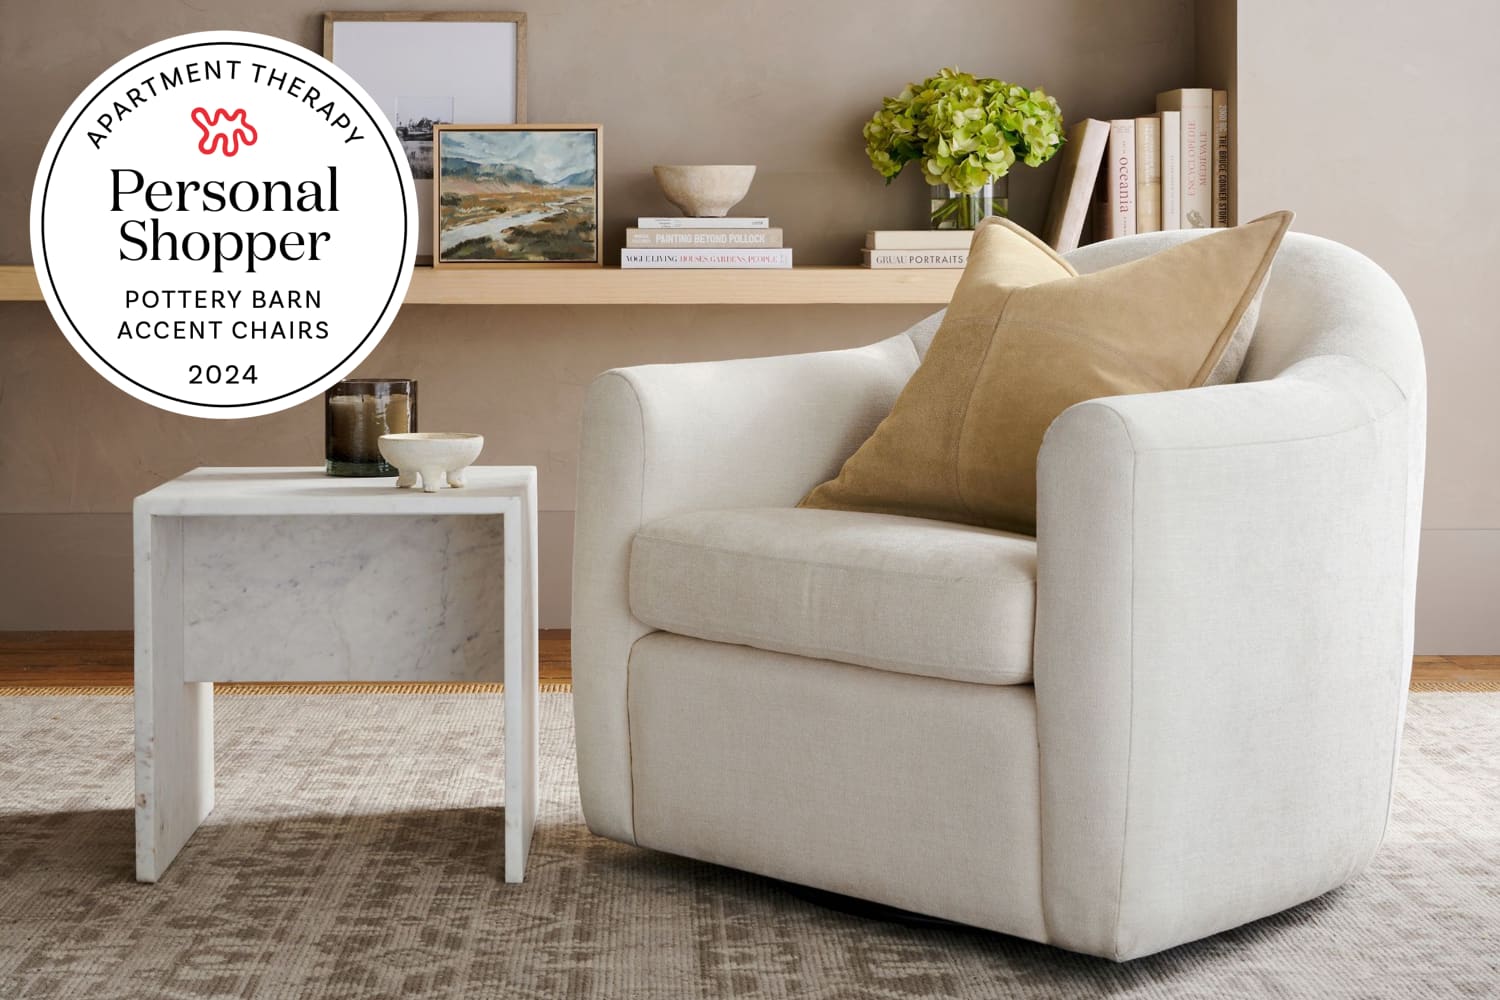 We Tested (and Rated!) All the Accent Chairs at Pottery Barn — Here Are the Best to Suit Your Style and Space